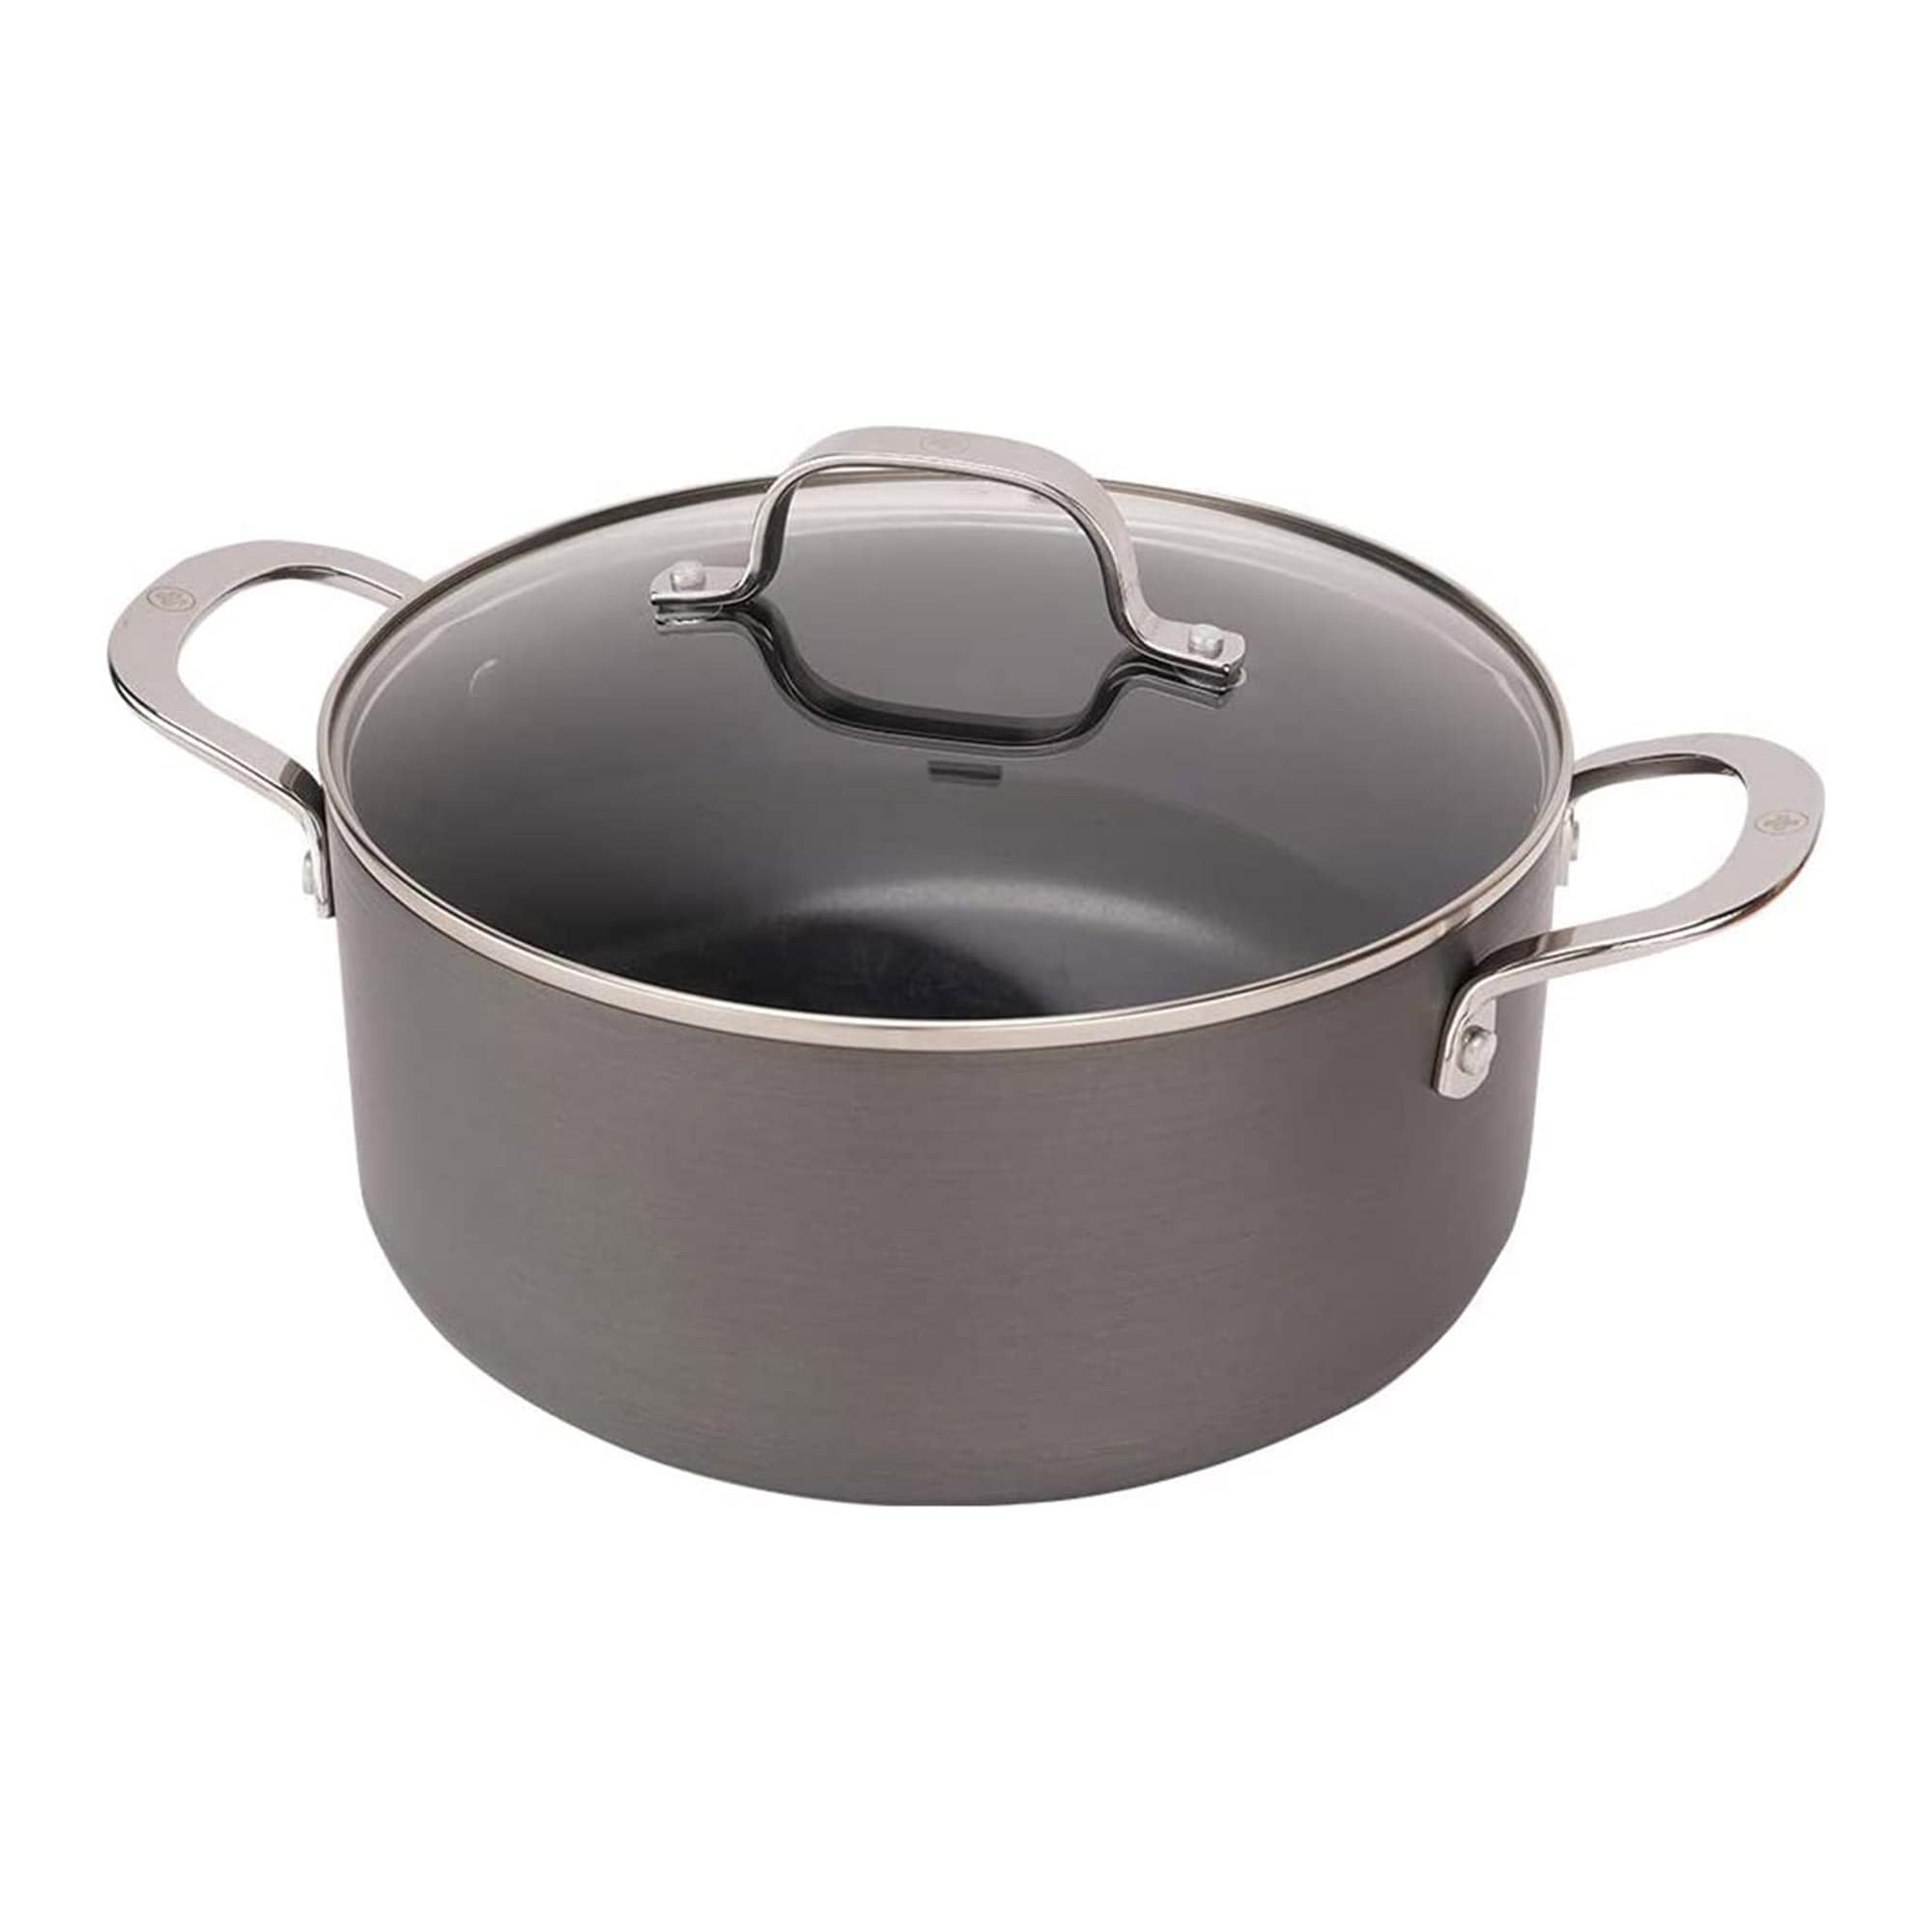 4.7L 24cm (5 Quart 9.5 Inch) Hard Anodized Nonstick Dutch Oven With Lid -  Bed Bath & Beyond - 37881977